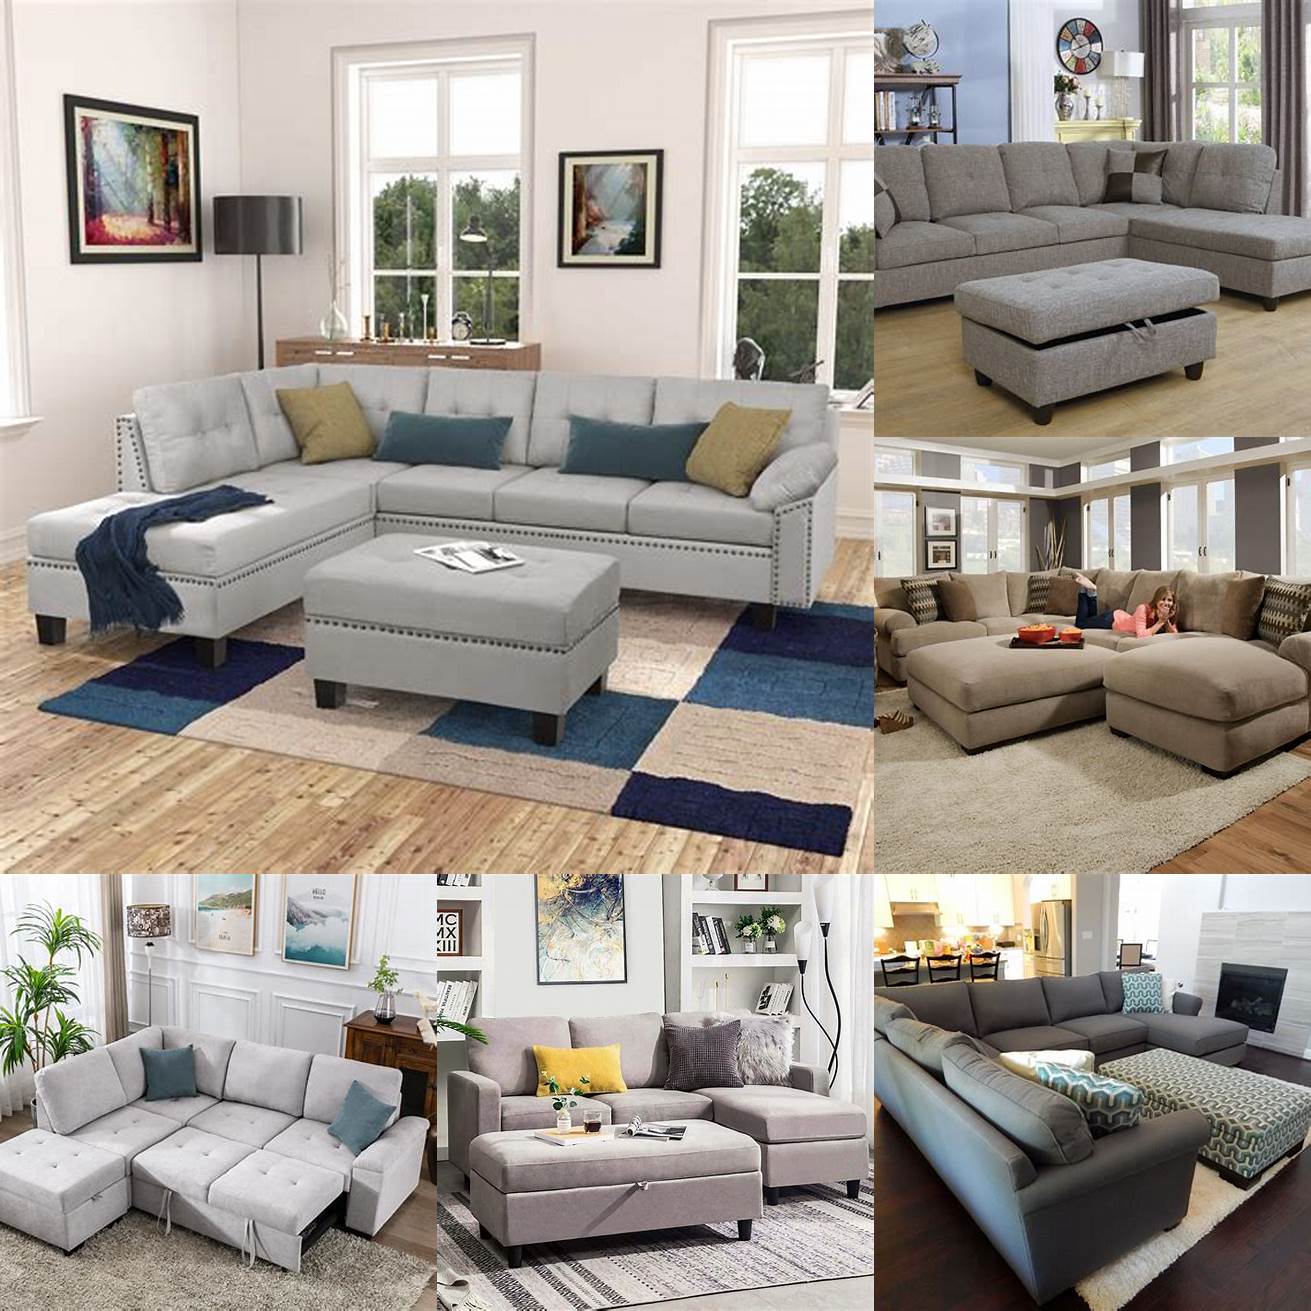 Image 5 A L-shaped large sectional sofa with a storage ottoman and colorful throw pillows